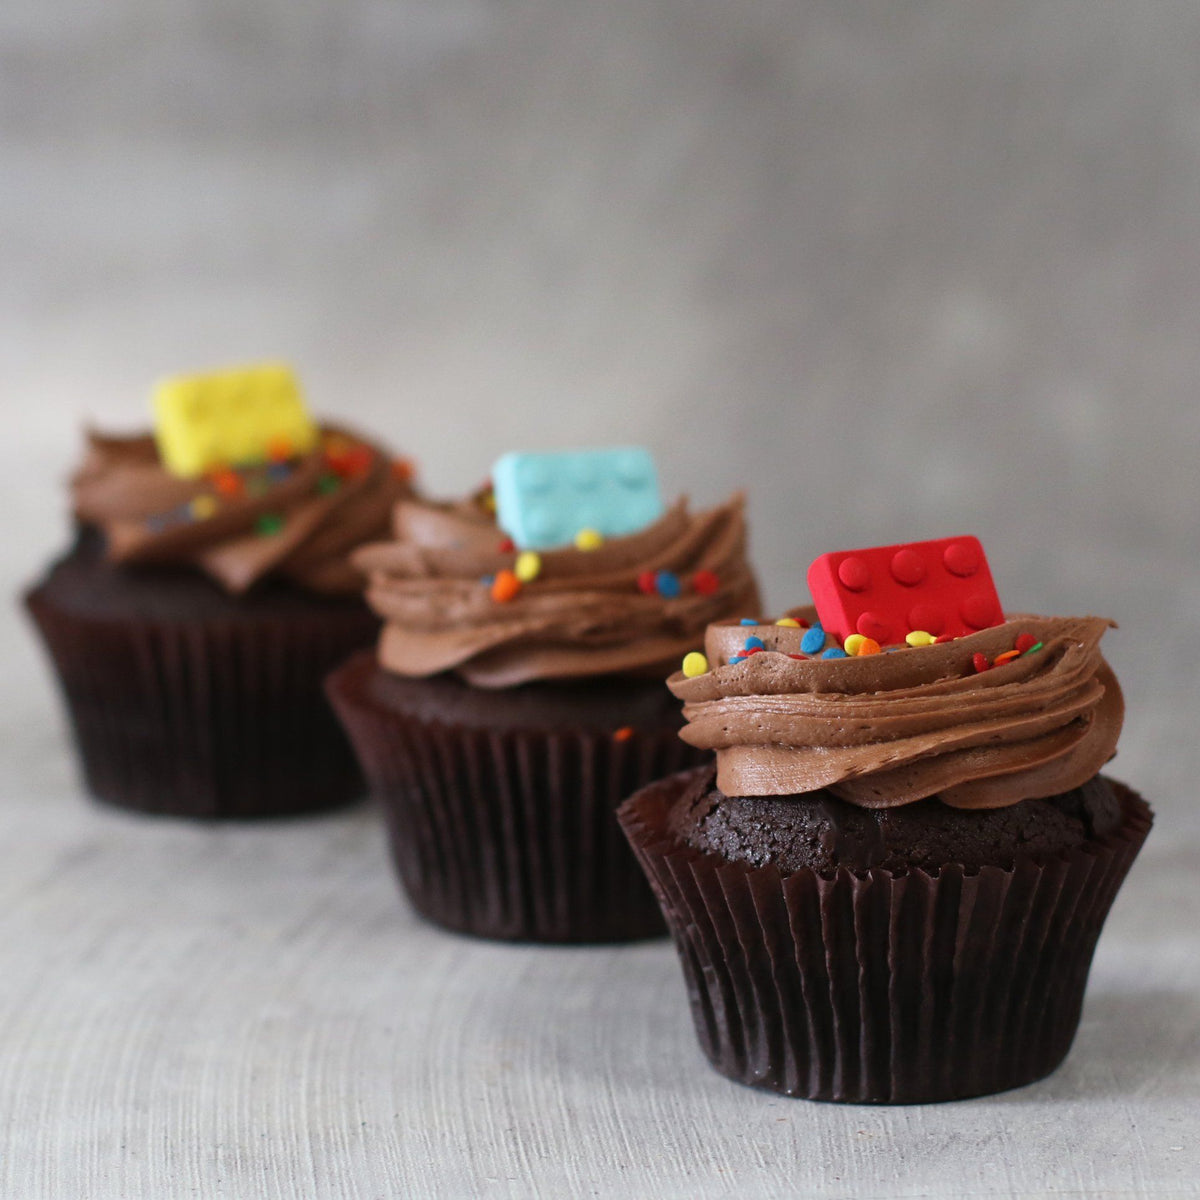 Lego Chocolate Gift Box Cupcakes The Cupcake Queens 